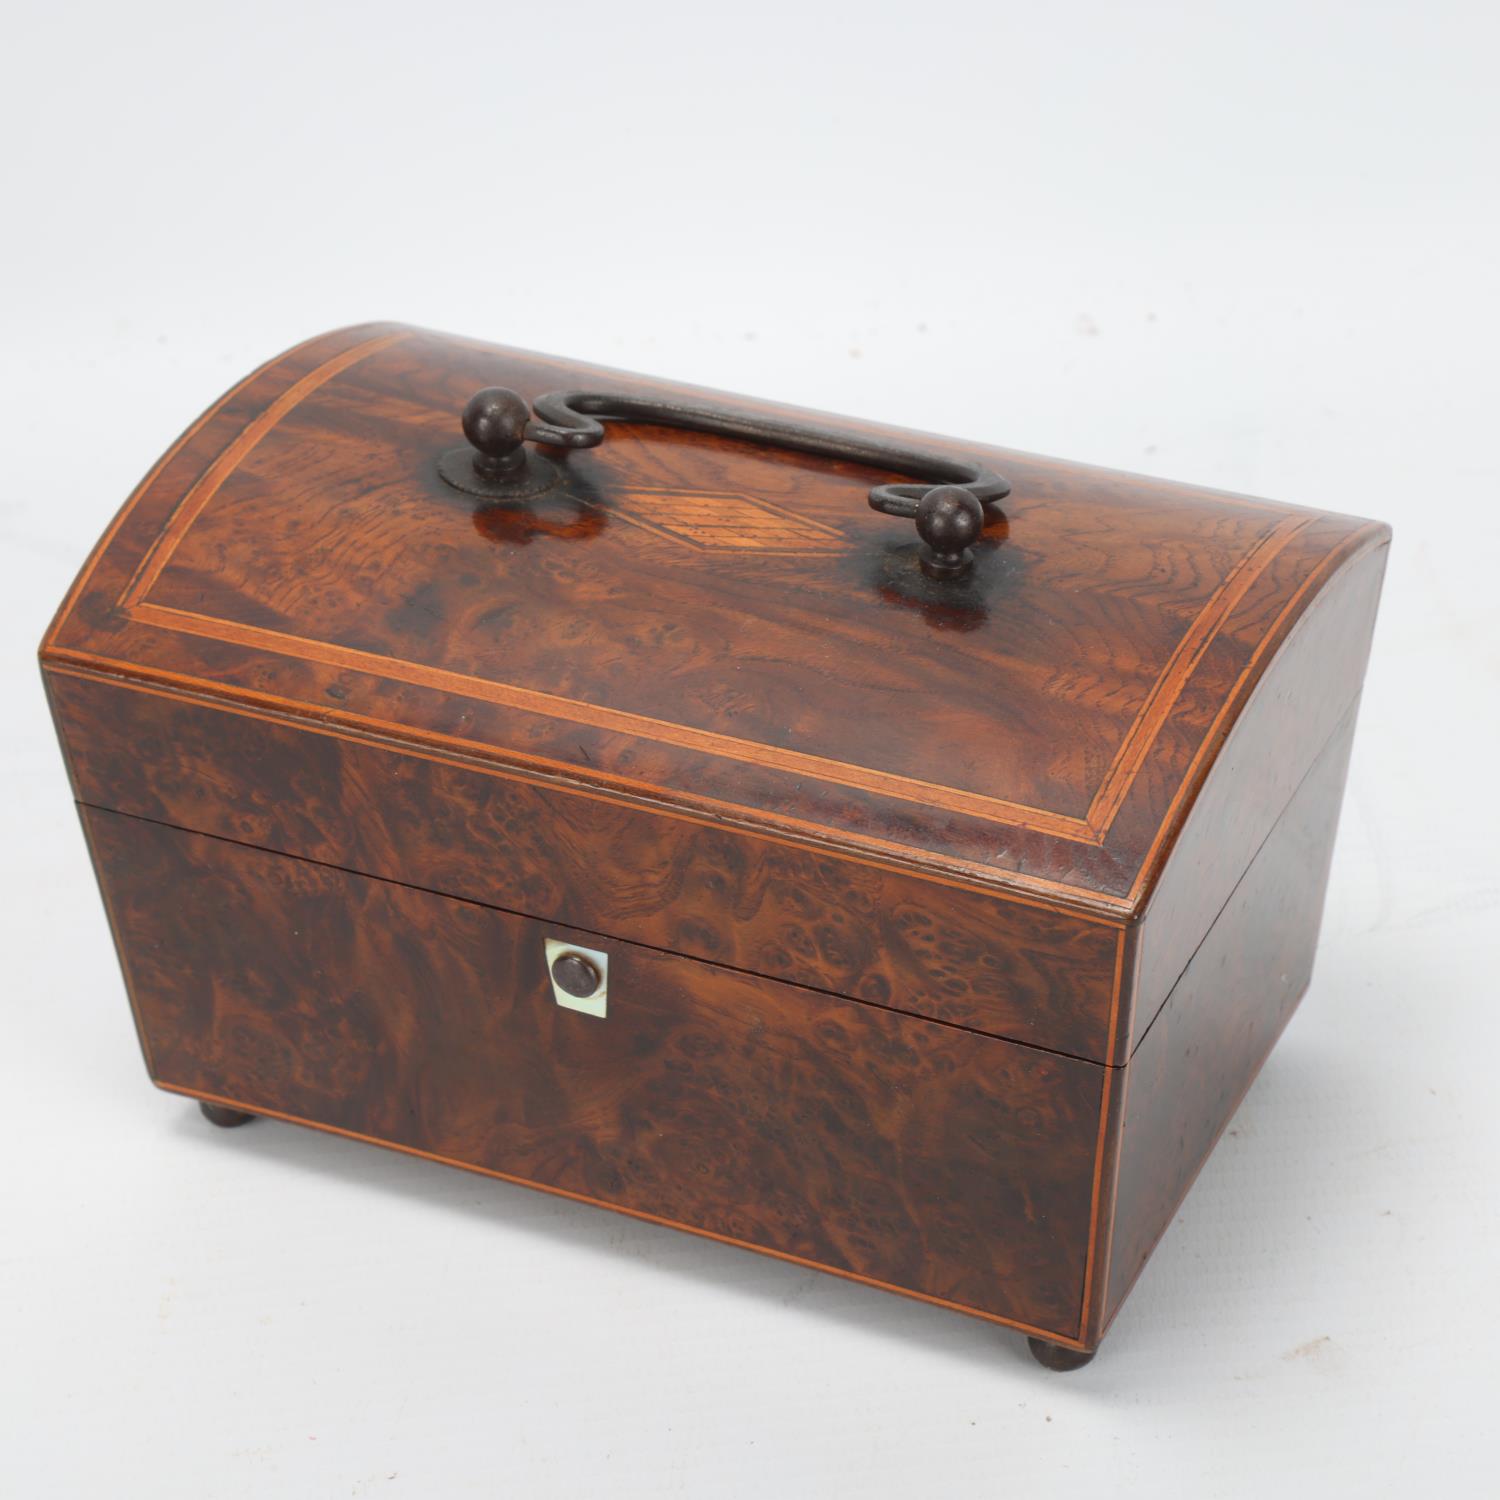 A fine quality French dome-top musical sewing etui box, circa 1800, burr-walnut and banded, the - Image 3 of 3